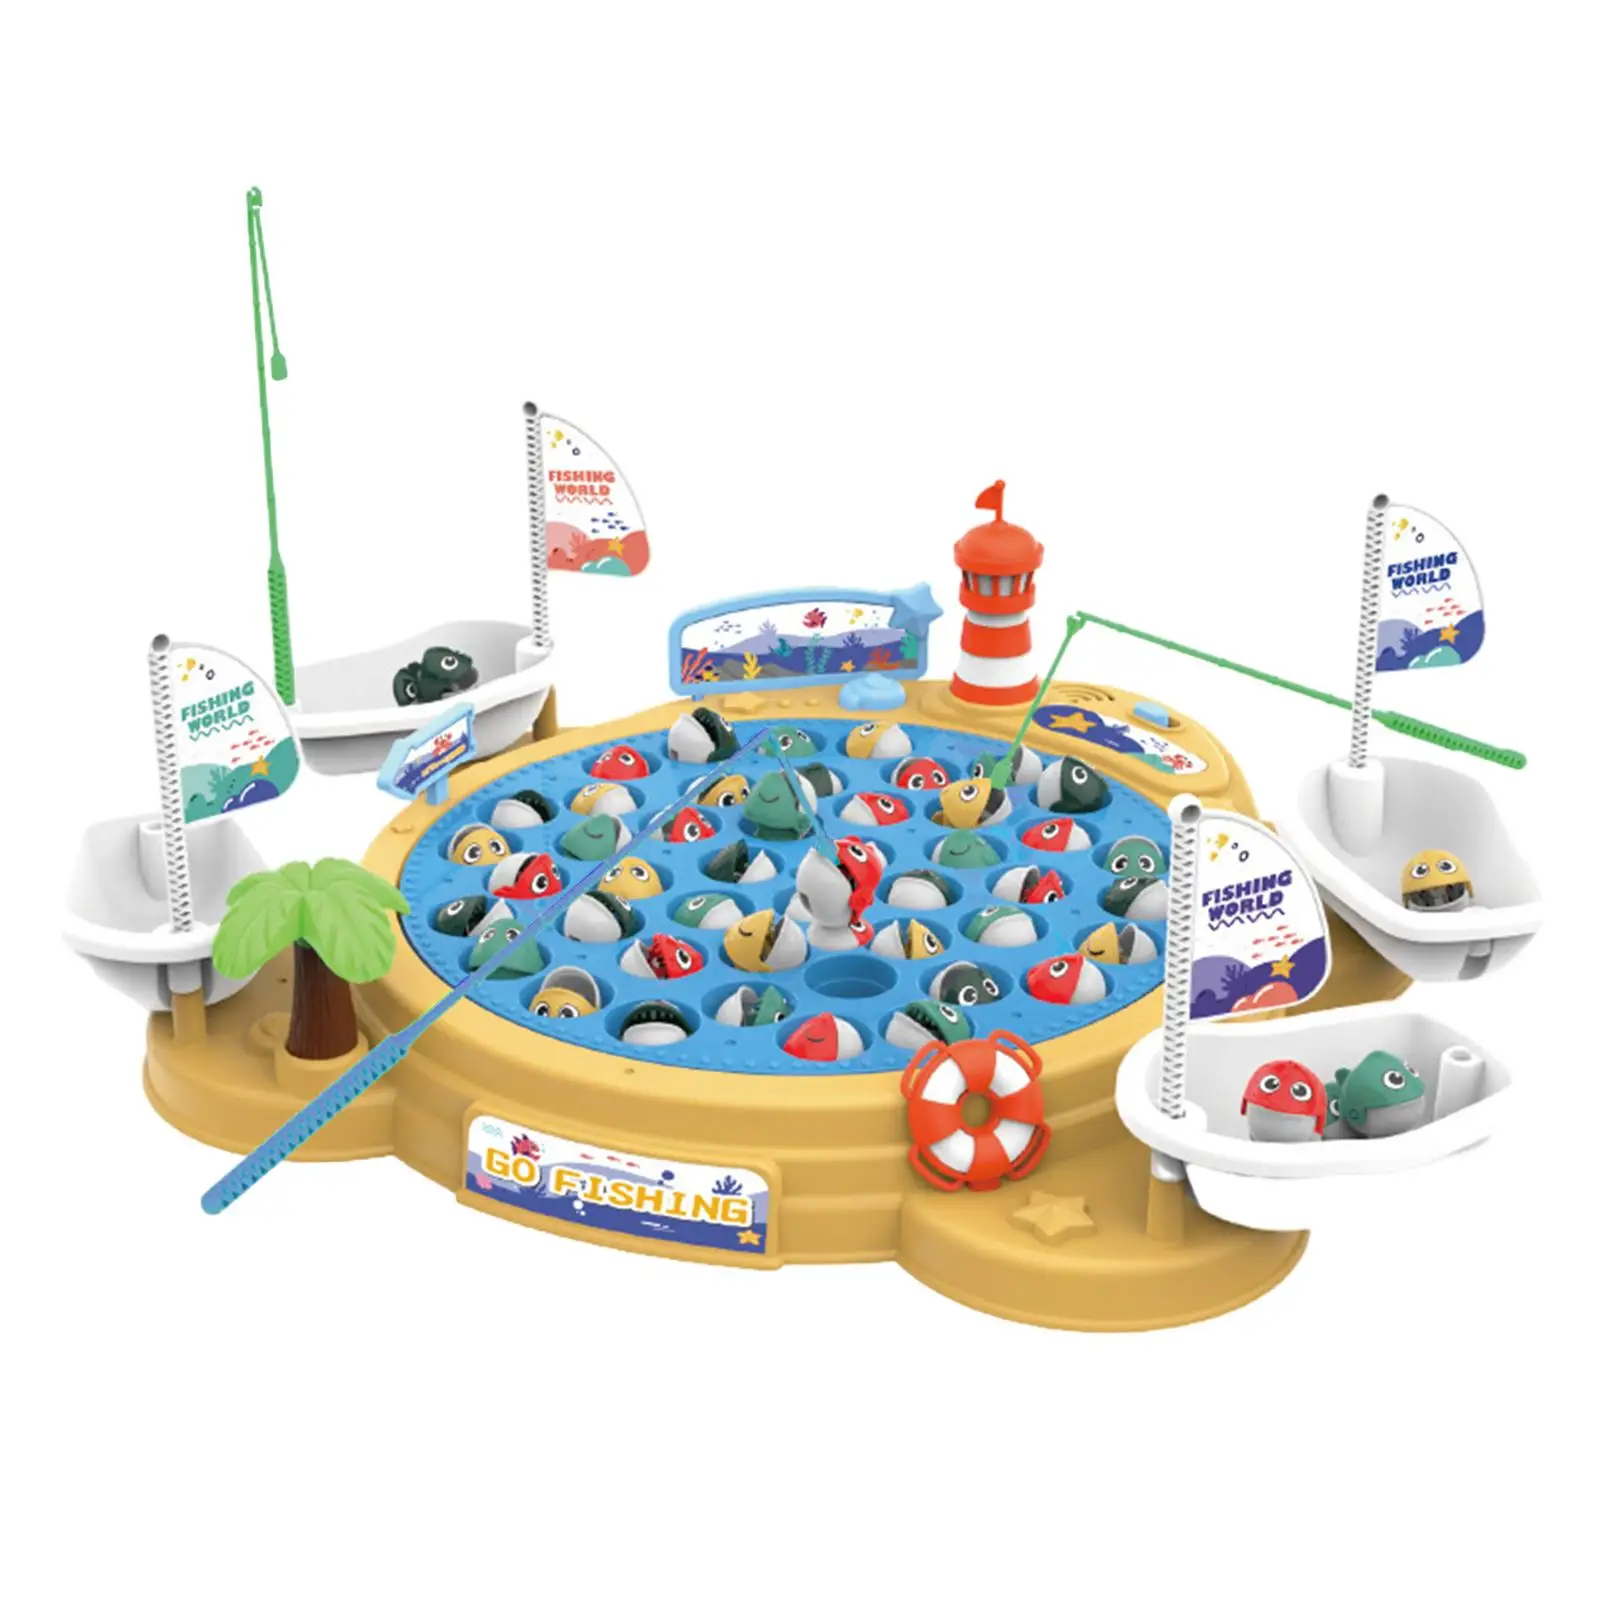 Electric Fishing Toy Developmental Toy Novelty with Music Fishing Game Play Set for Boys Kids Toddlers Children Holiday Gifts